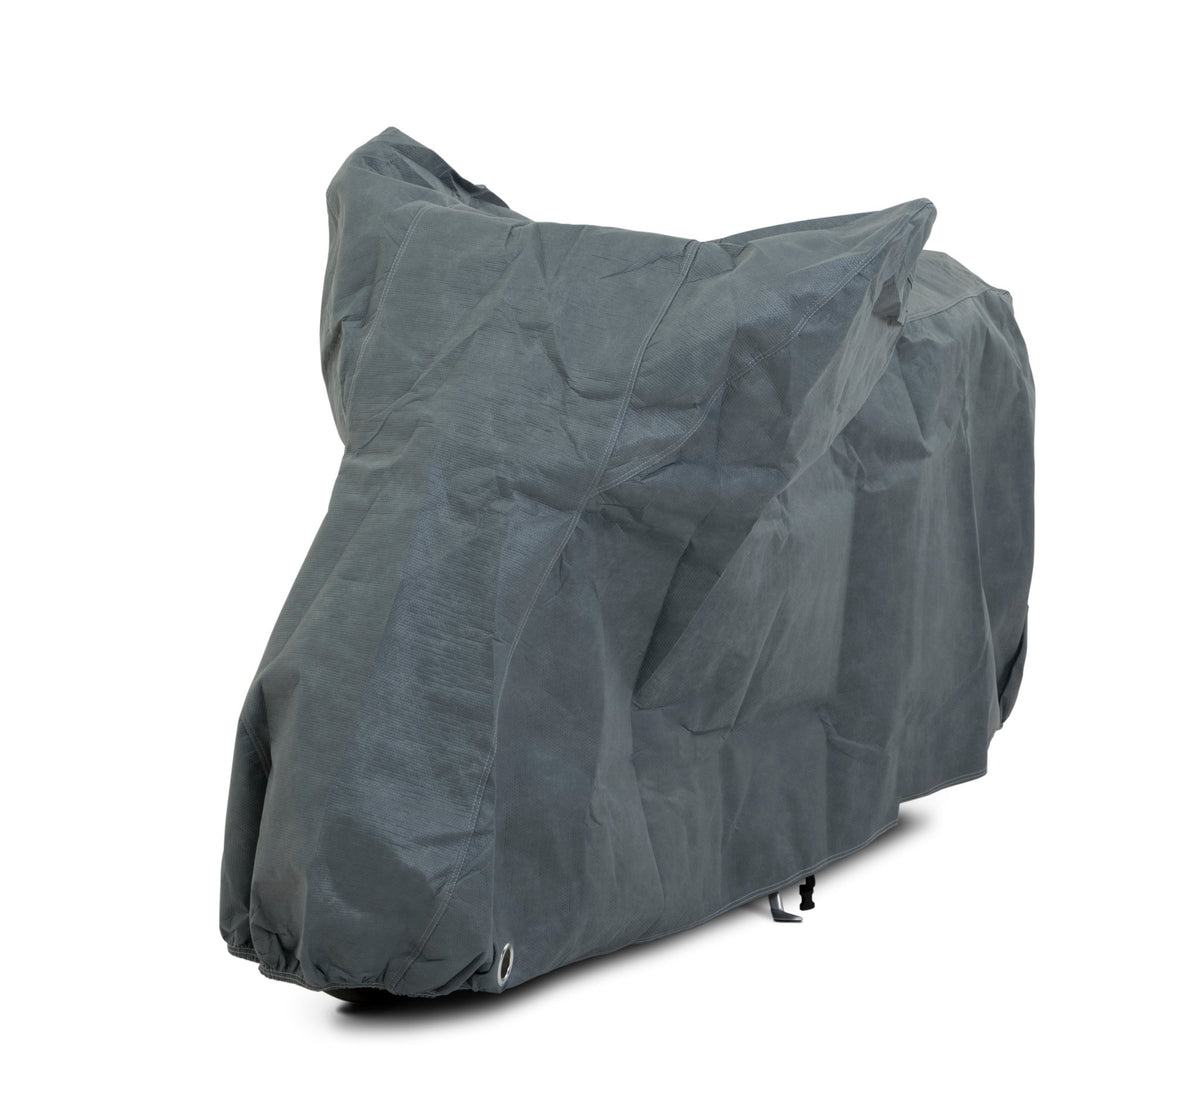 Stormforce best outdoor motorcycle covers for KAWASAKI - Storm Motorcycle Covers